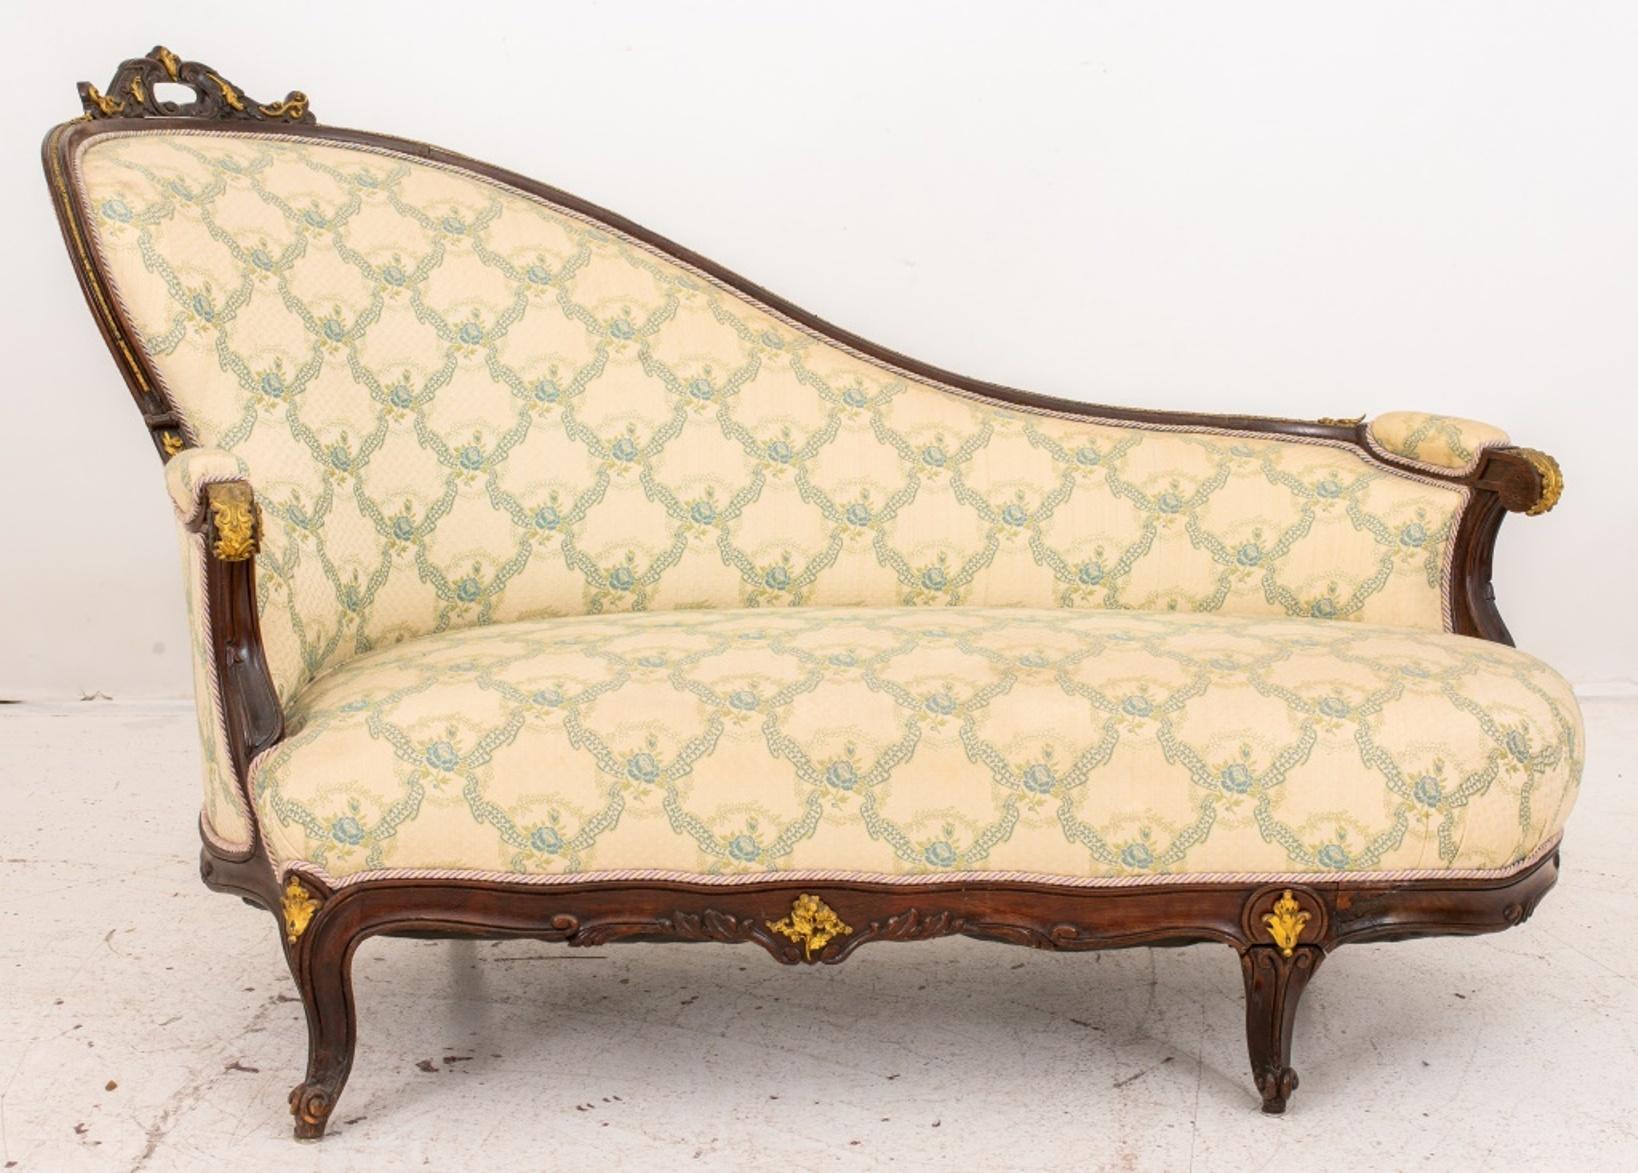 Rococo Revival ormolu mounted rosewood sofa in the form of a chaise, the crest rail with ormolu mounted carved rocaille above a down swept upholstered back, and arms above a shaped seat rail, upholstered in a blue and white damask on cabriole legs